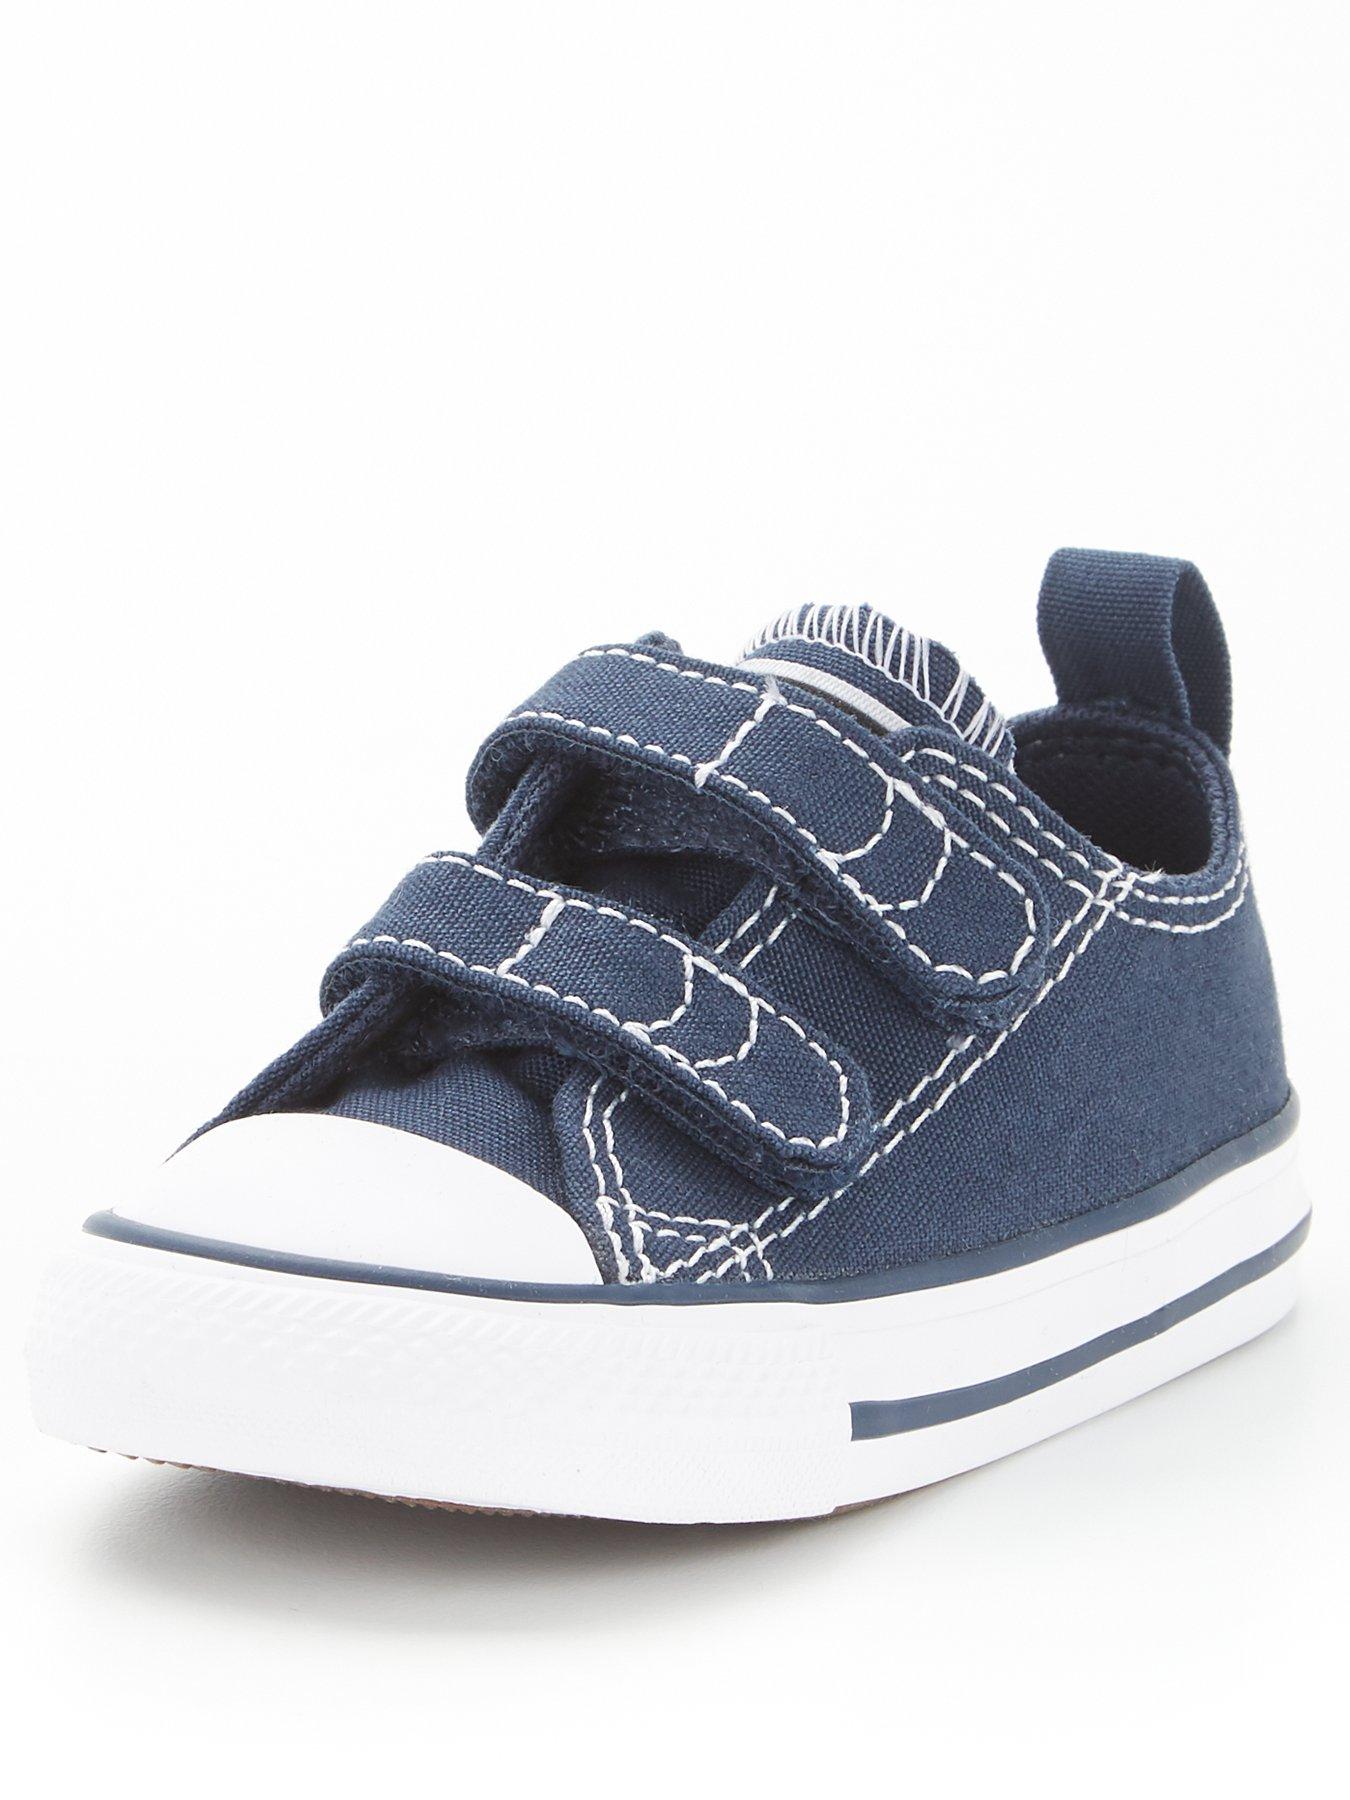 Trainers Chuck Taylor All Star Ox Infant Boys 2V Canvas Trainers -Navy/White